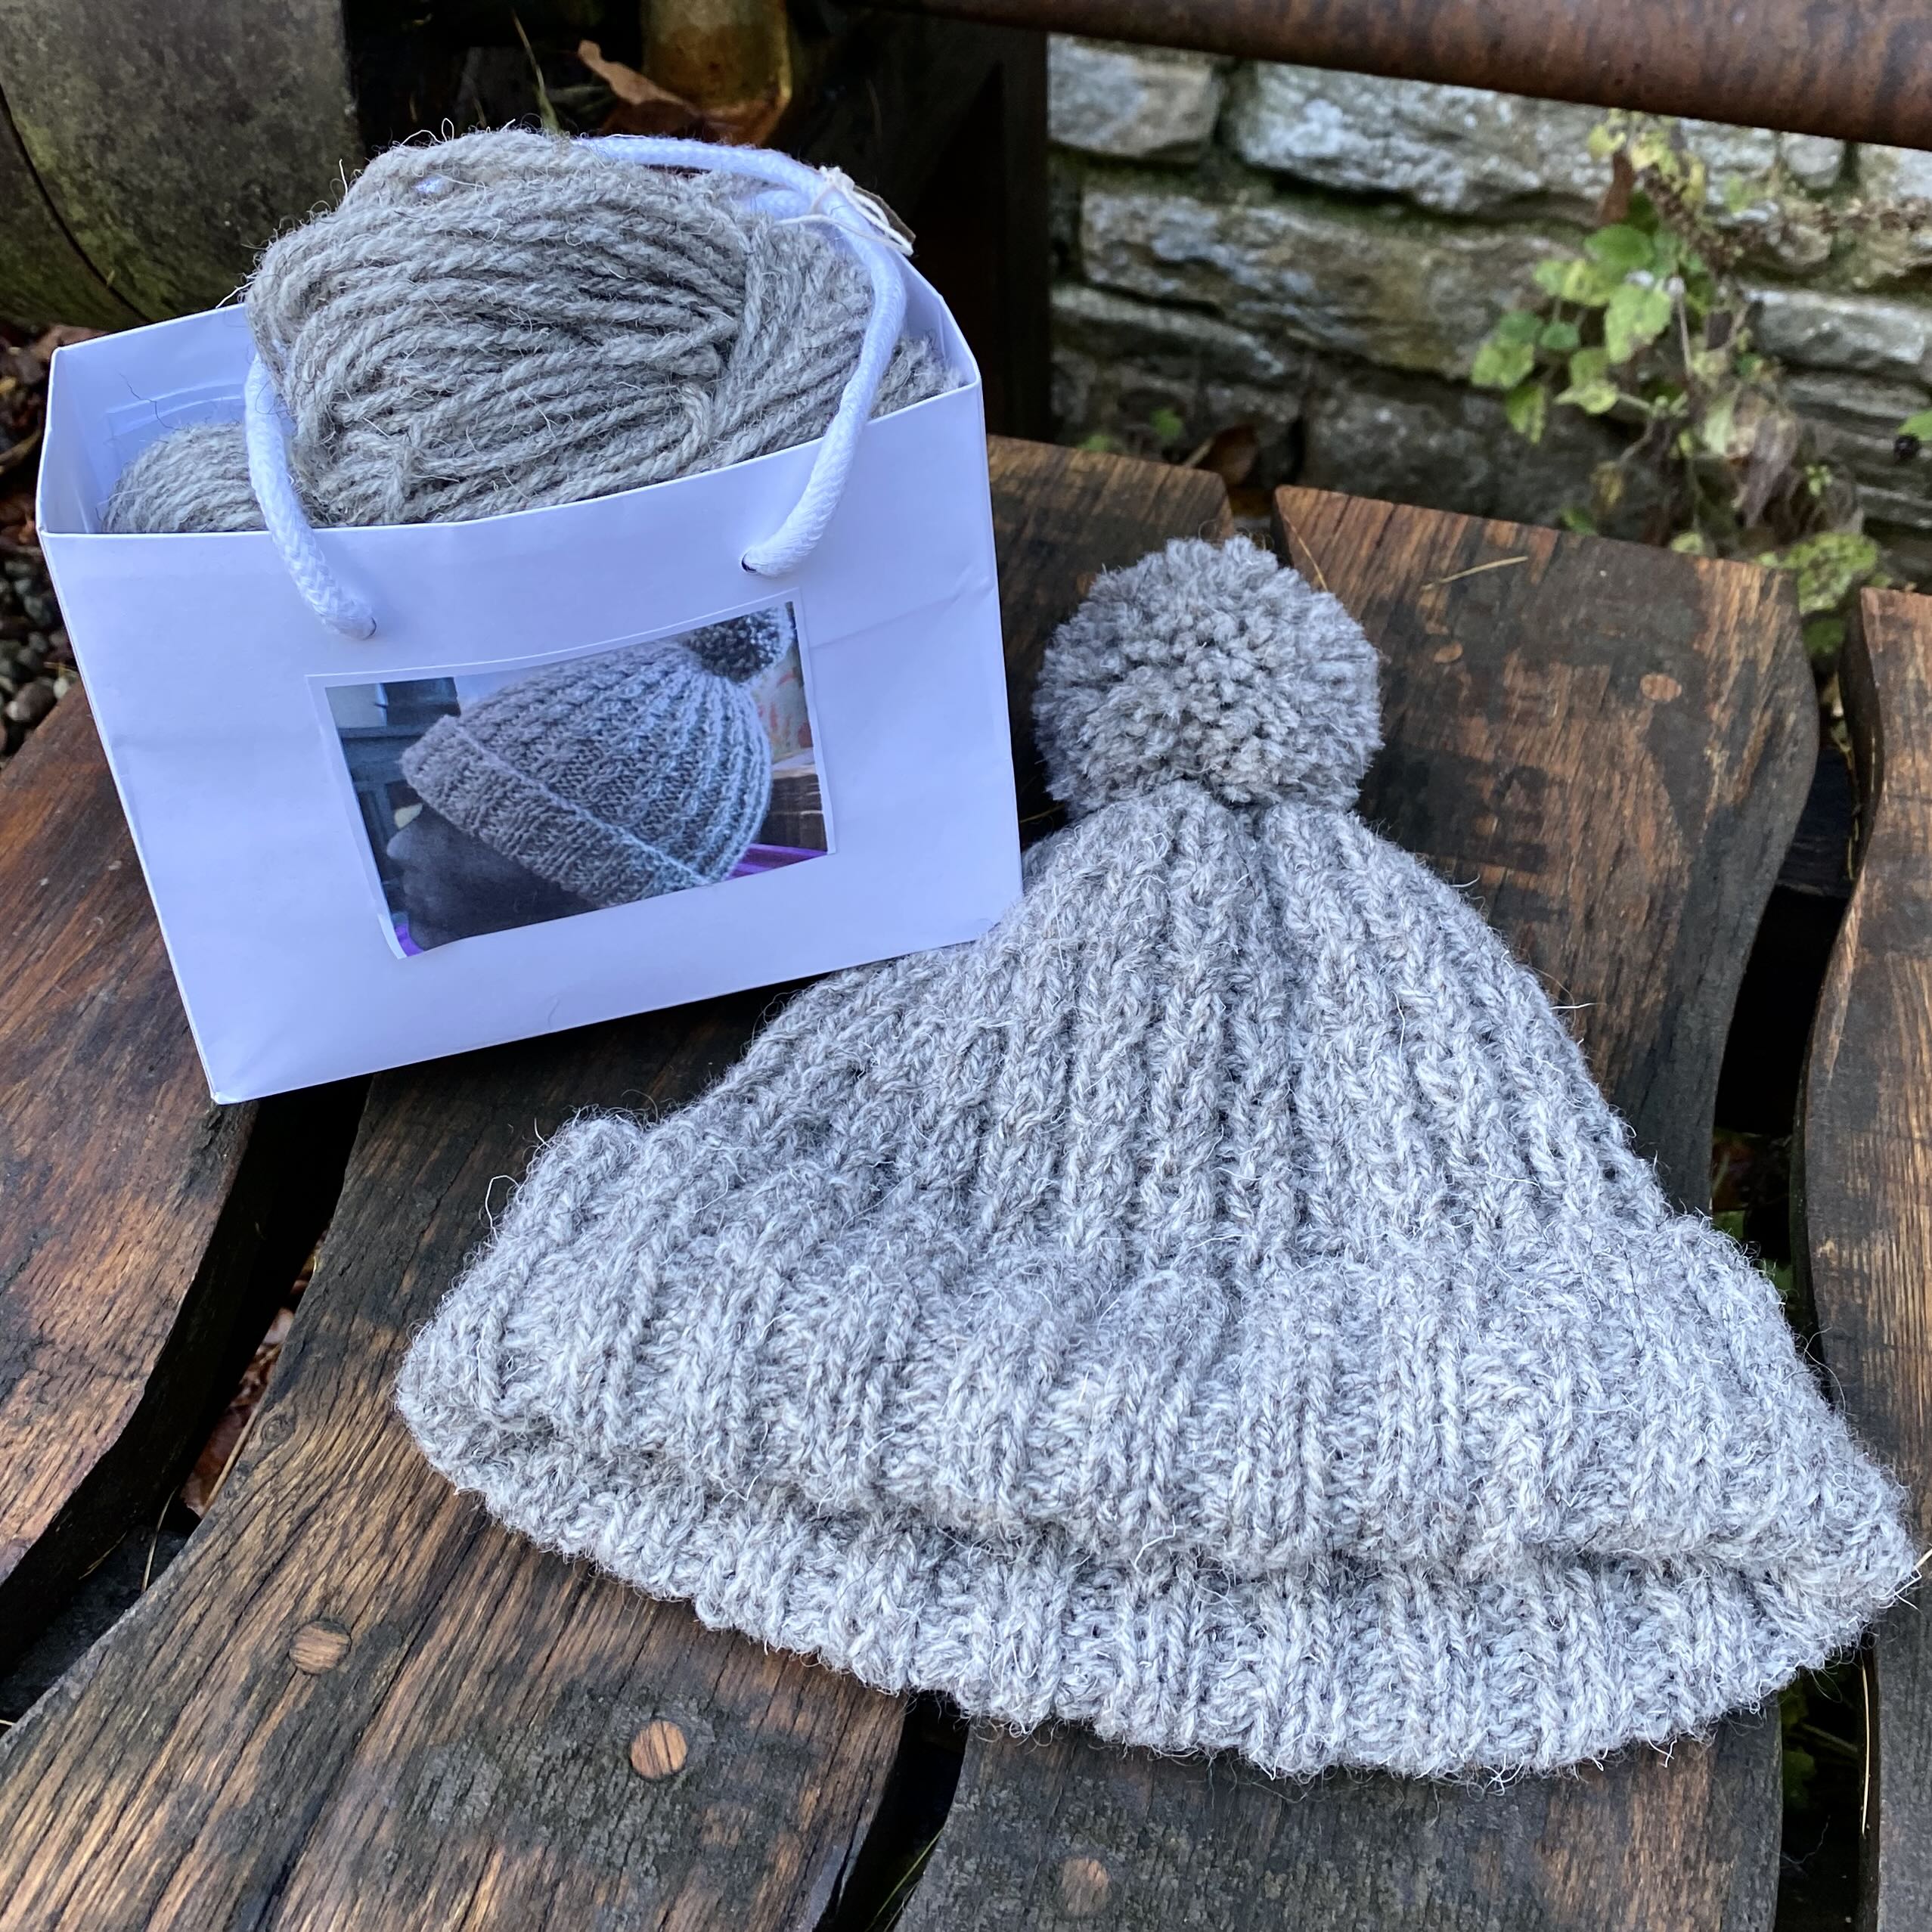 Cabled Hat Knitting Kit